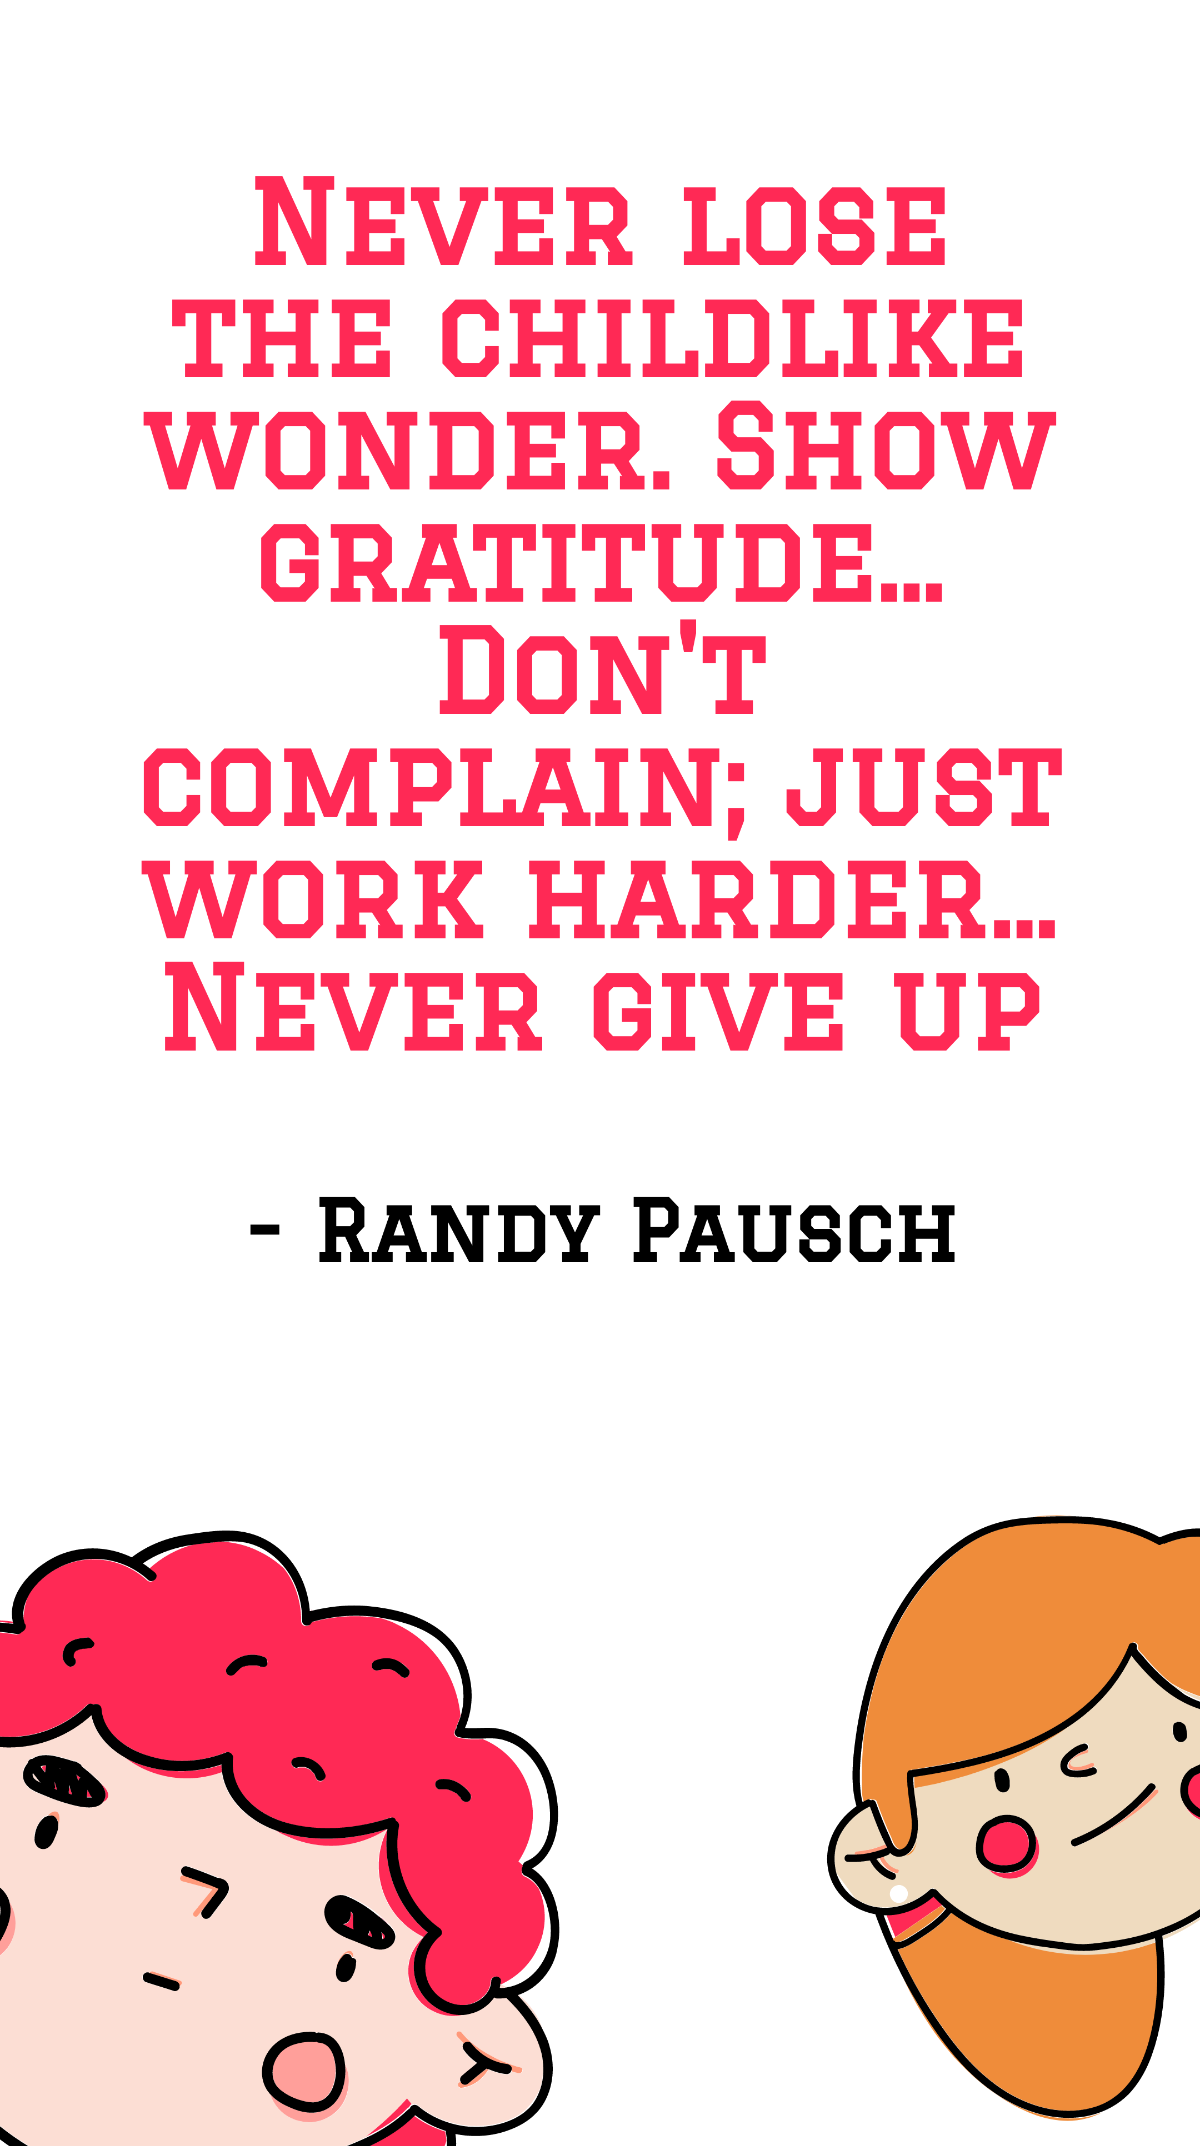 Randy Pausch - Never lose the childlike wonder. Show gratitude... Don't complain; just work harder... Never give up Template